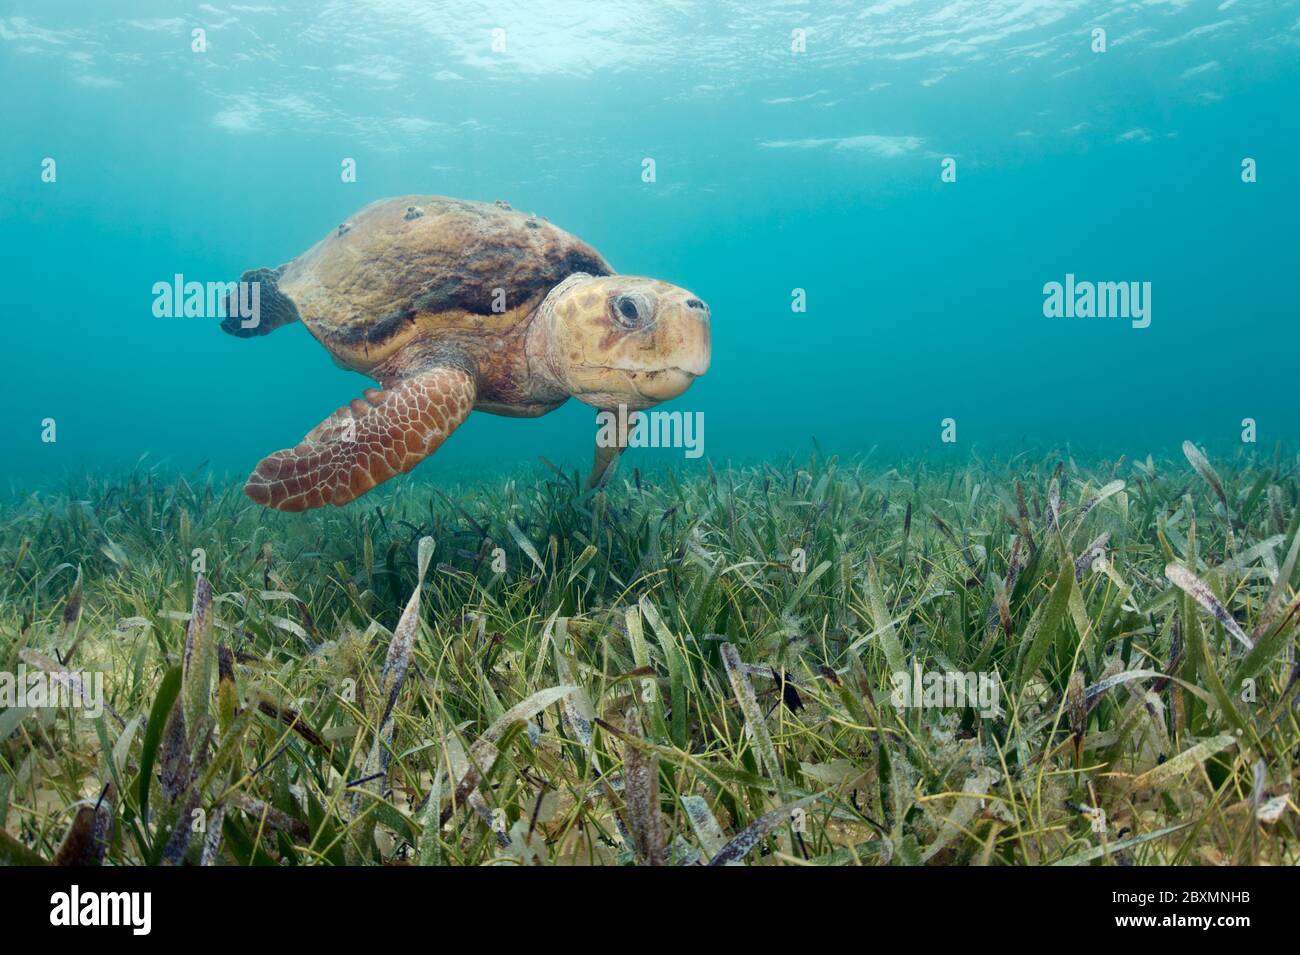 Loggerhead seaturtle is searching for food underwater at the Belize Barrier Reef Stock Photo